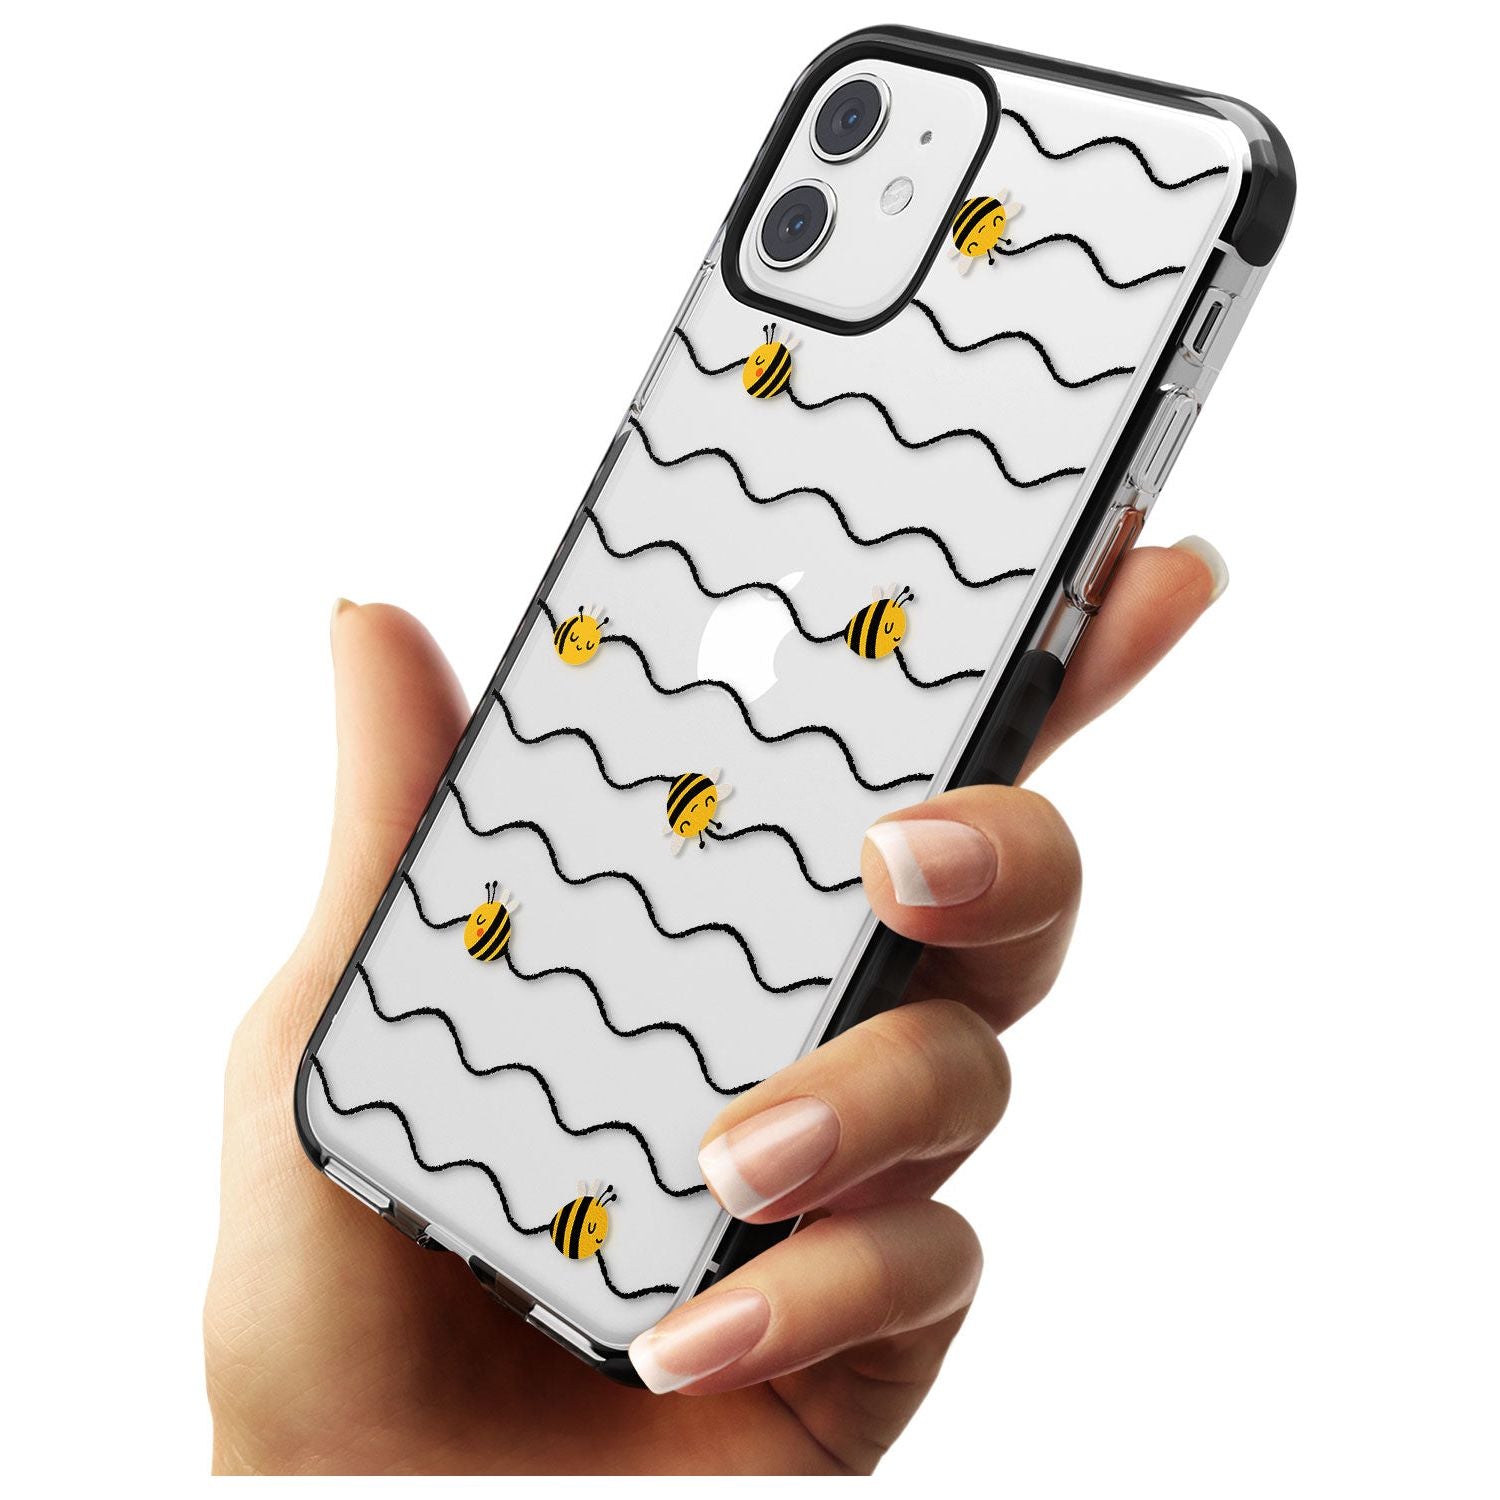 Sweet as Honey Patterns: Bees & Stripes (Clear) Black Impact Phone Case for iPhone 11